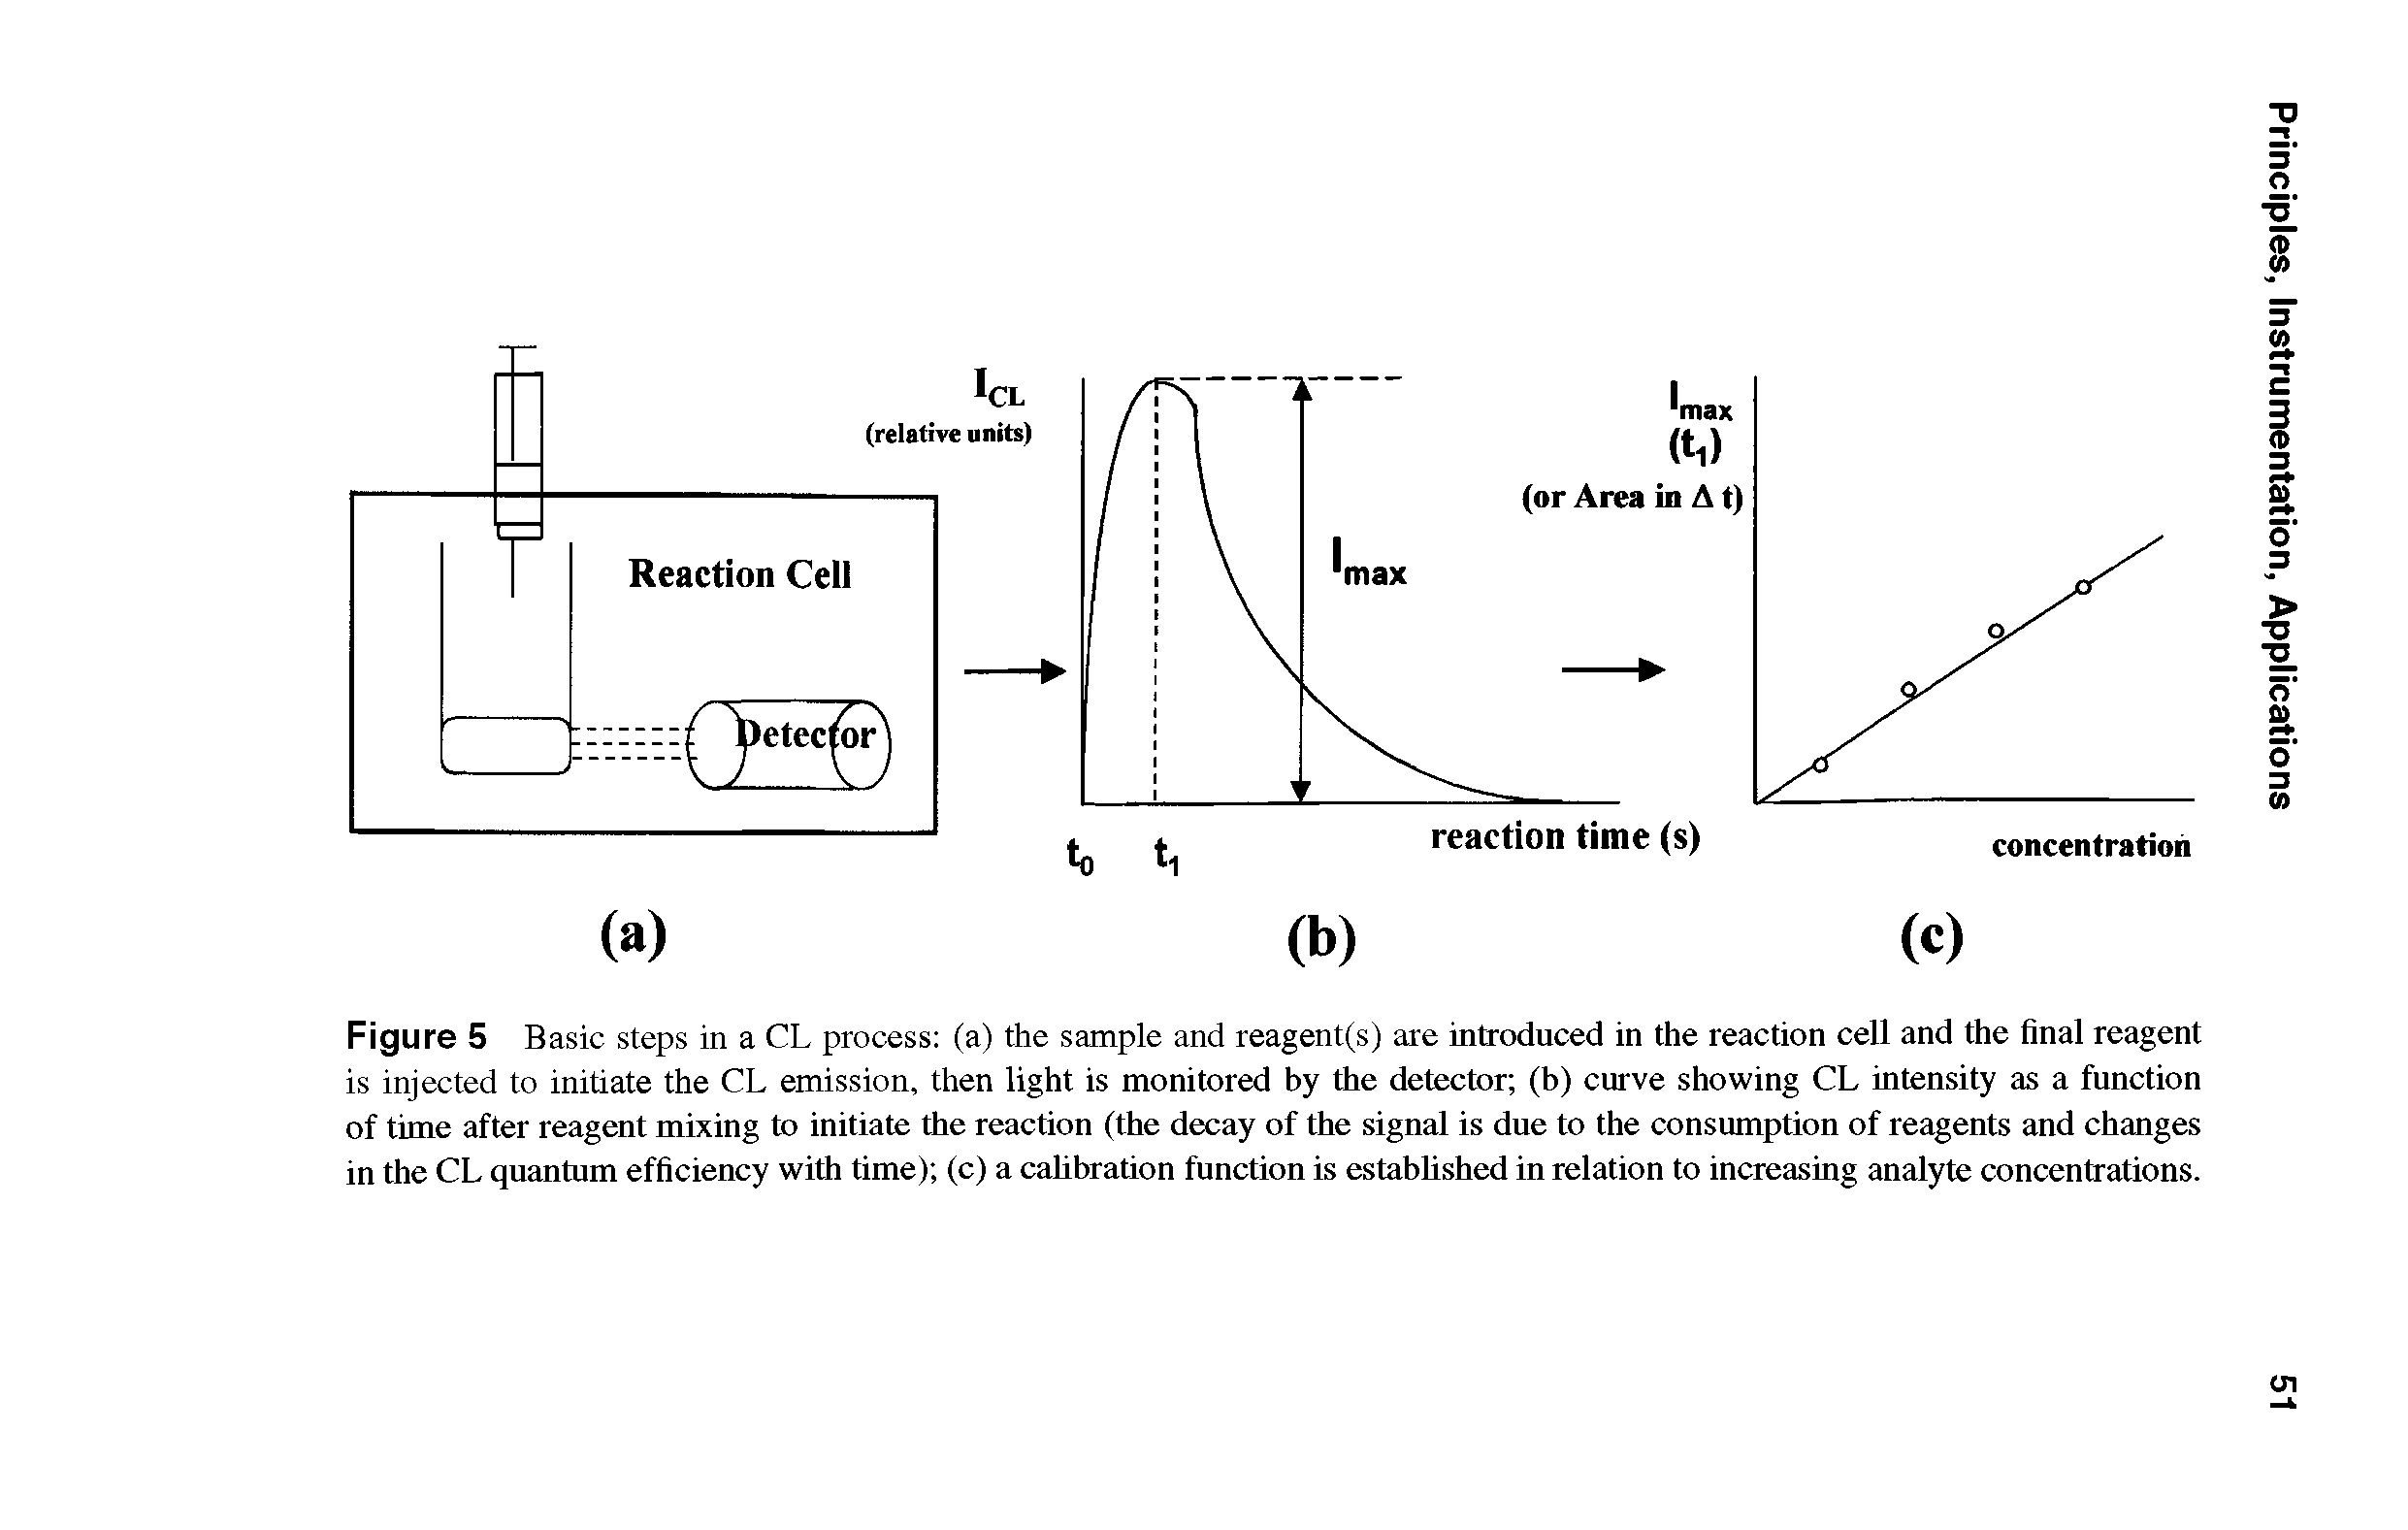 Figure 5 Basic steps in a CL process (a) the sample and reagent(s) are introduced in the reaction cell and the final reagent is injected to initiate the CL emission, then light is monitored by the detector (b) curve showing CL intensity as a function of time after reagent mixing to initiate the reaction (the decay of the signal is due to the consumption of reagents and changes in the CL quantum efficiency with time) (c) a calibration function is established in relation to increasing analyte concentrations.